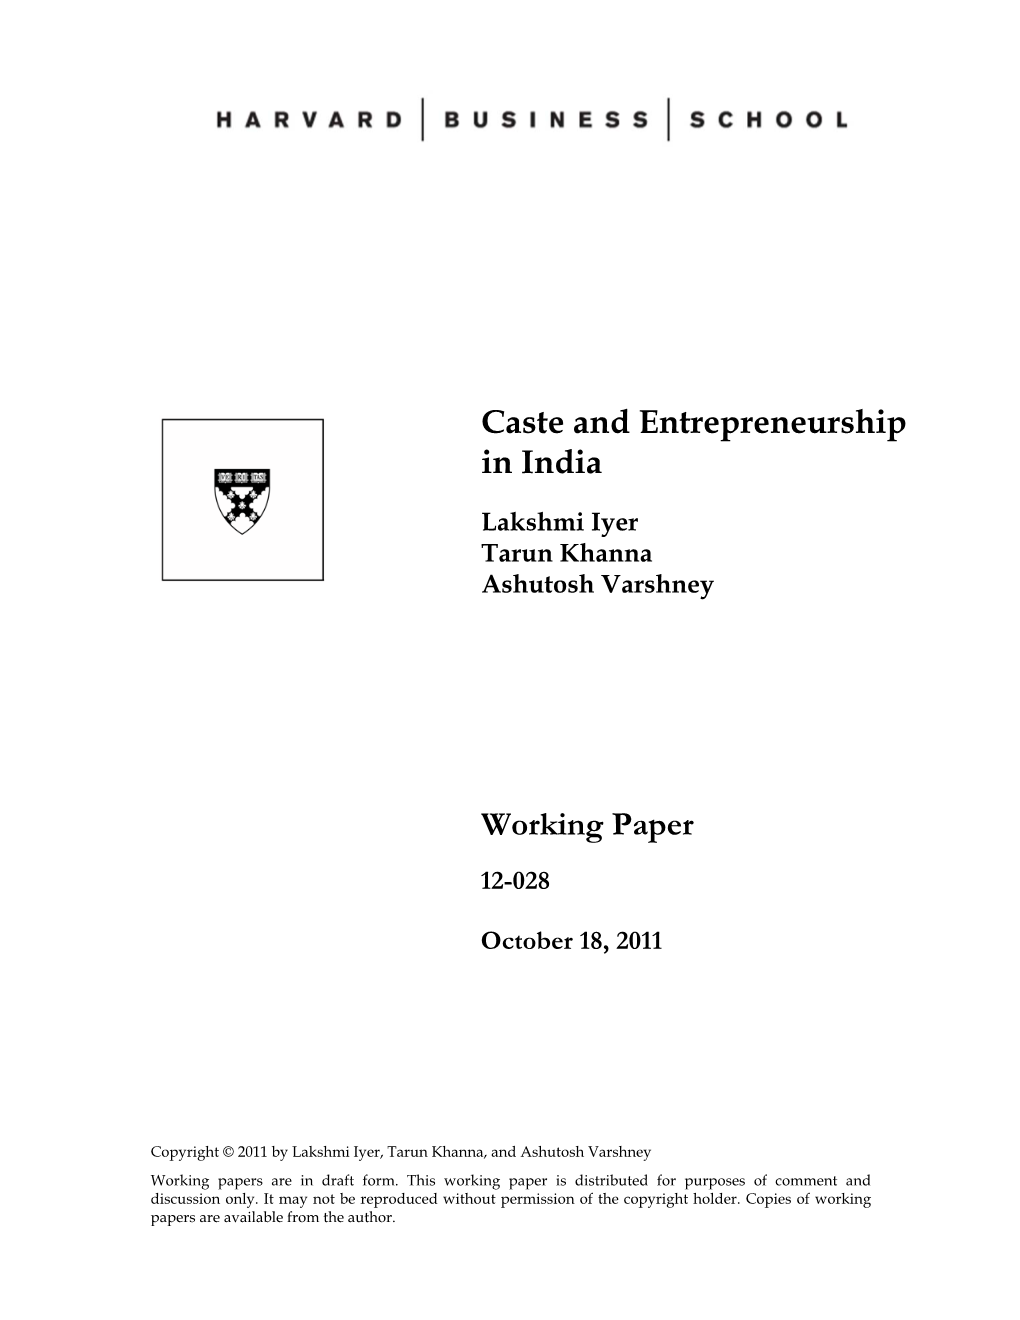 Caste and Entrepreneurship in India Working Paper